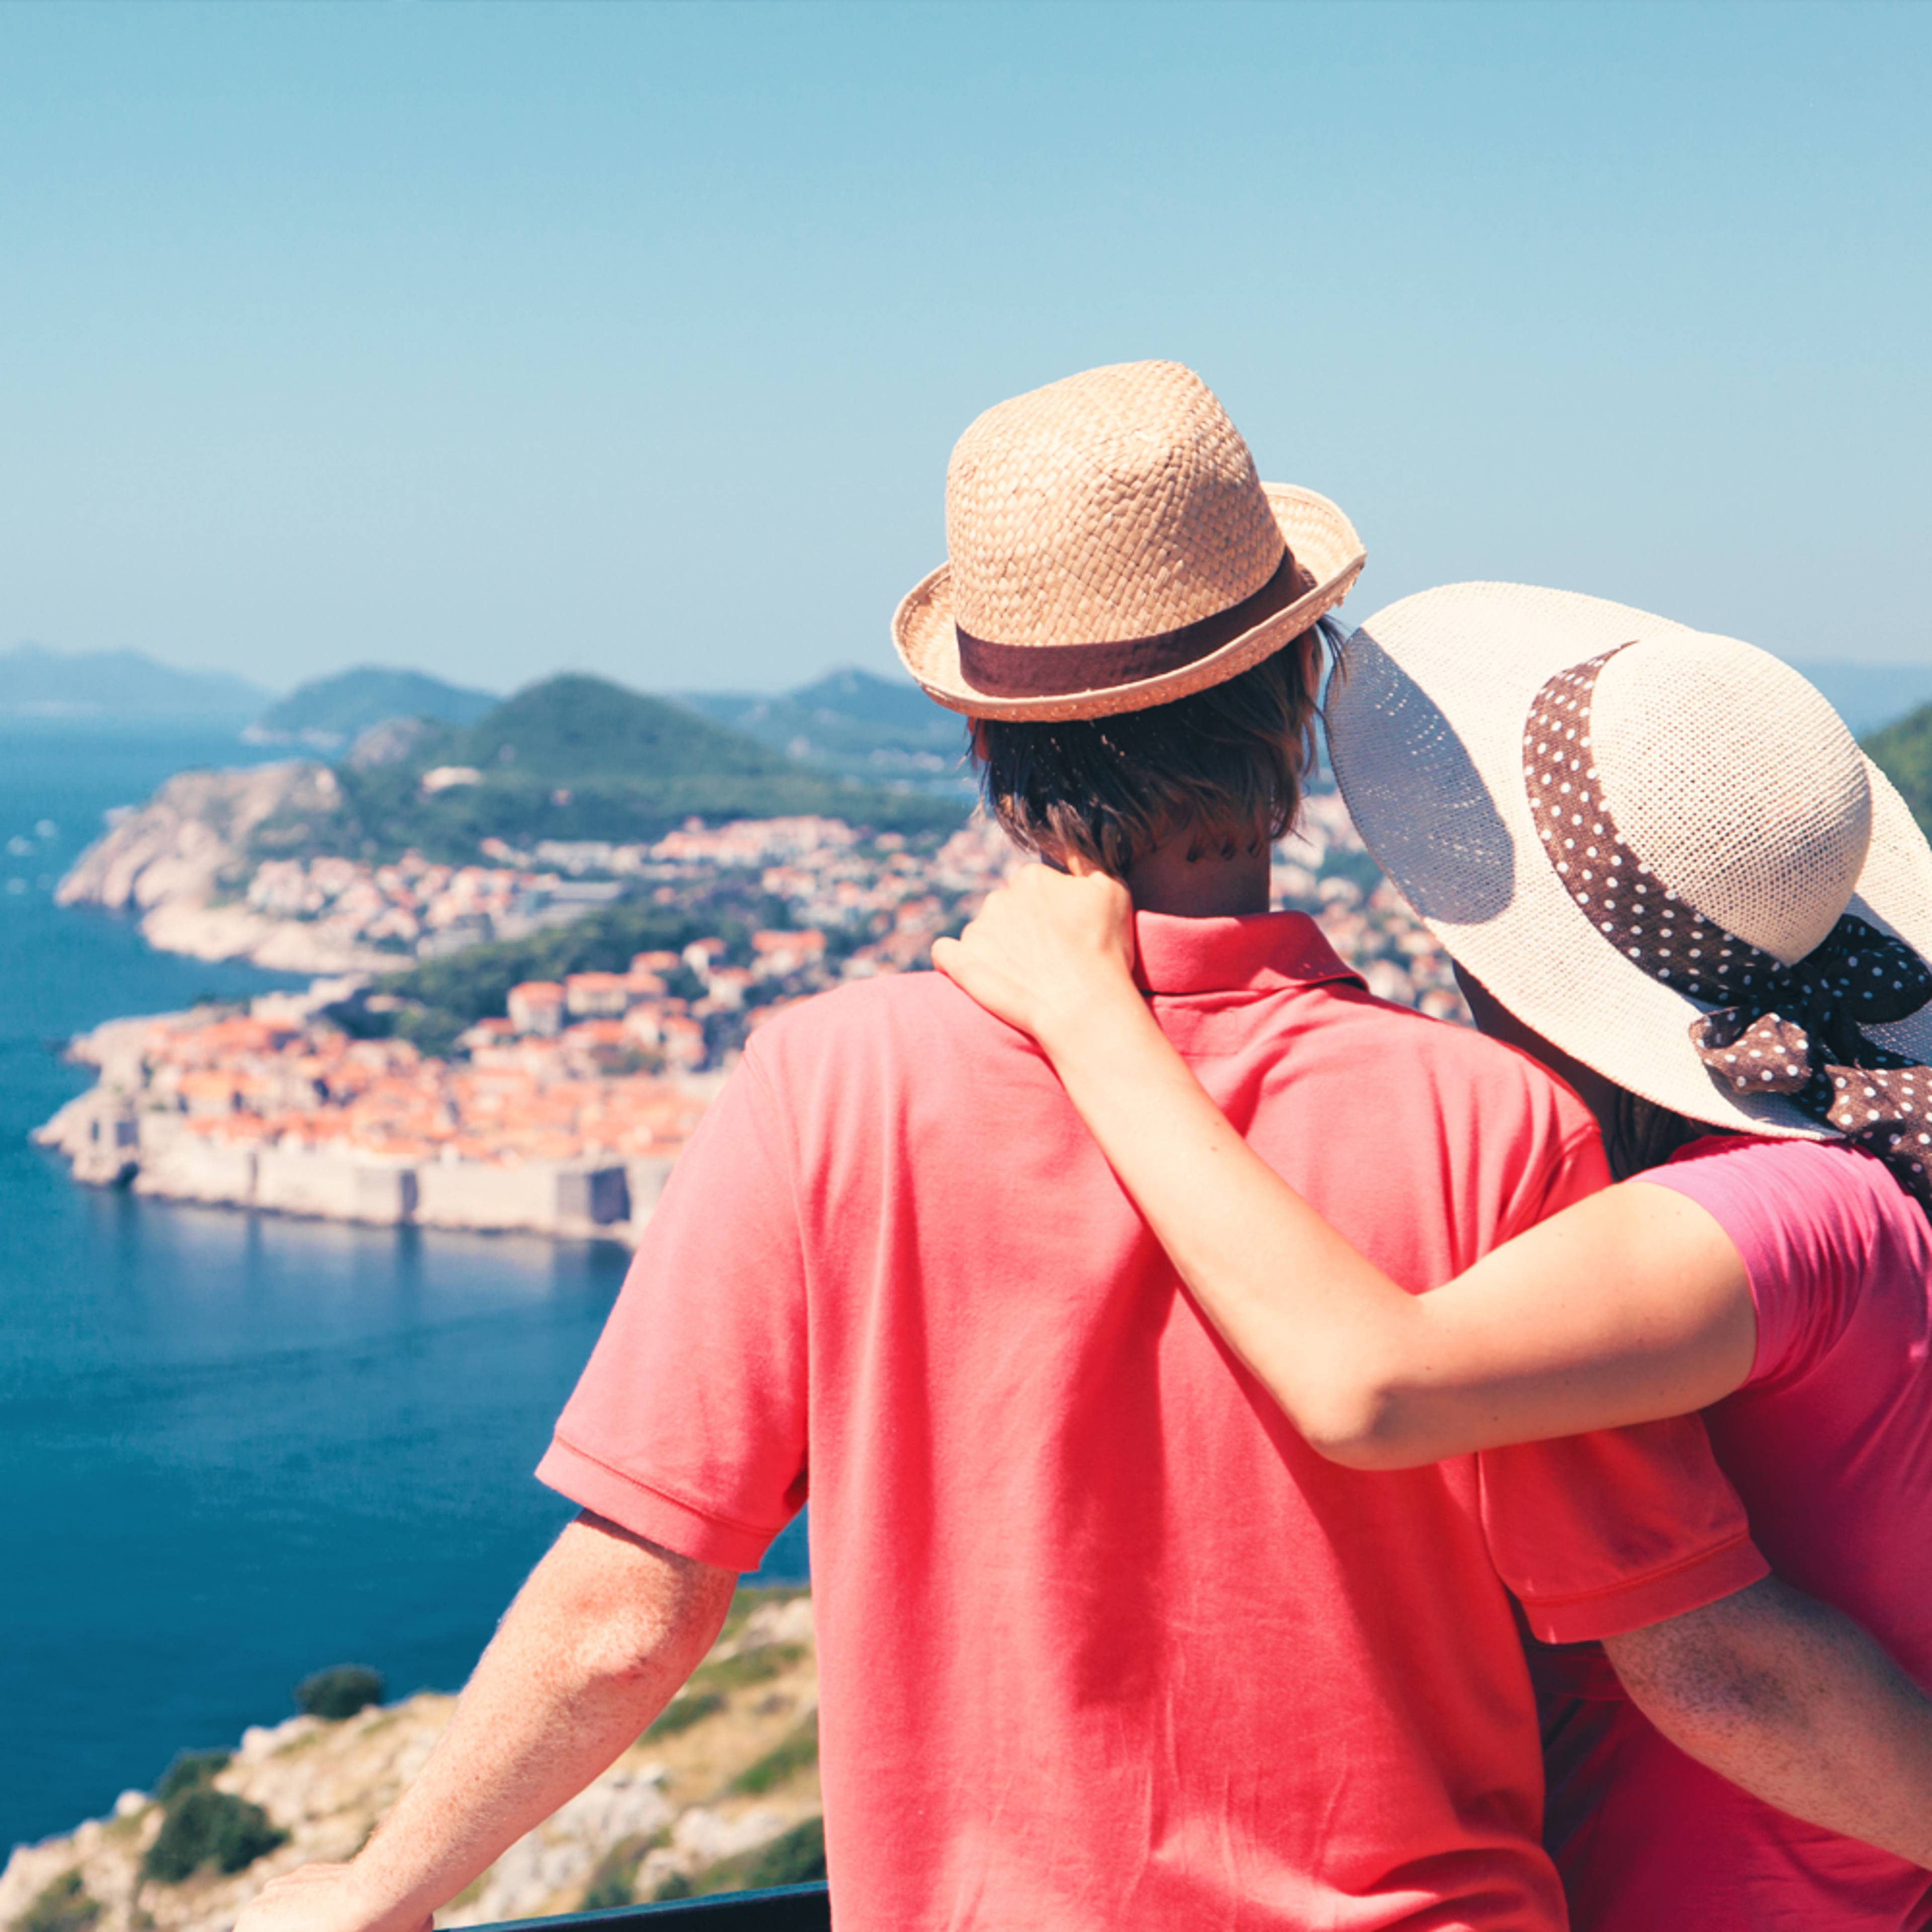 Design your romantic getaway with a local expert in Croatia